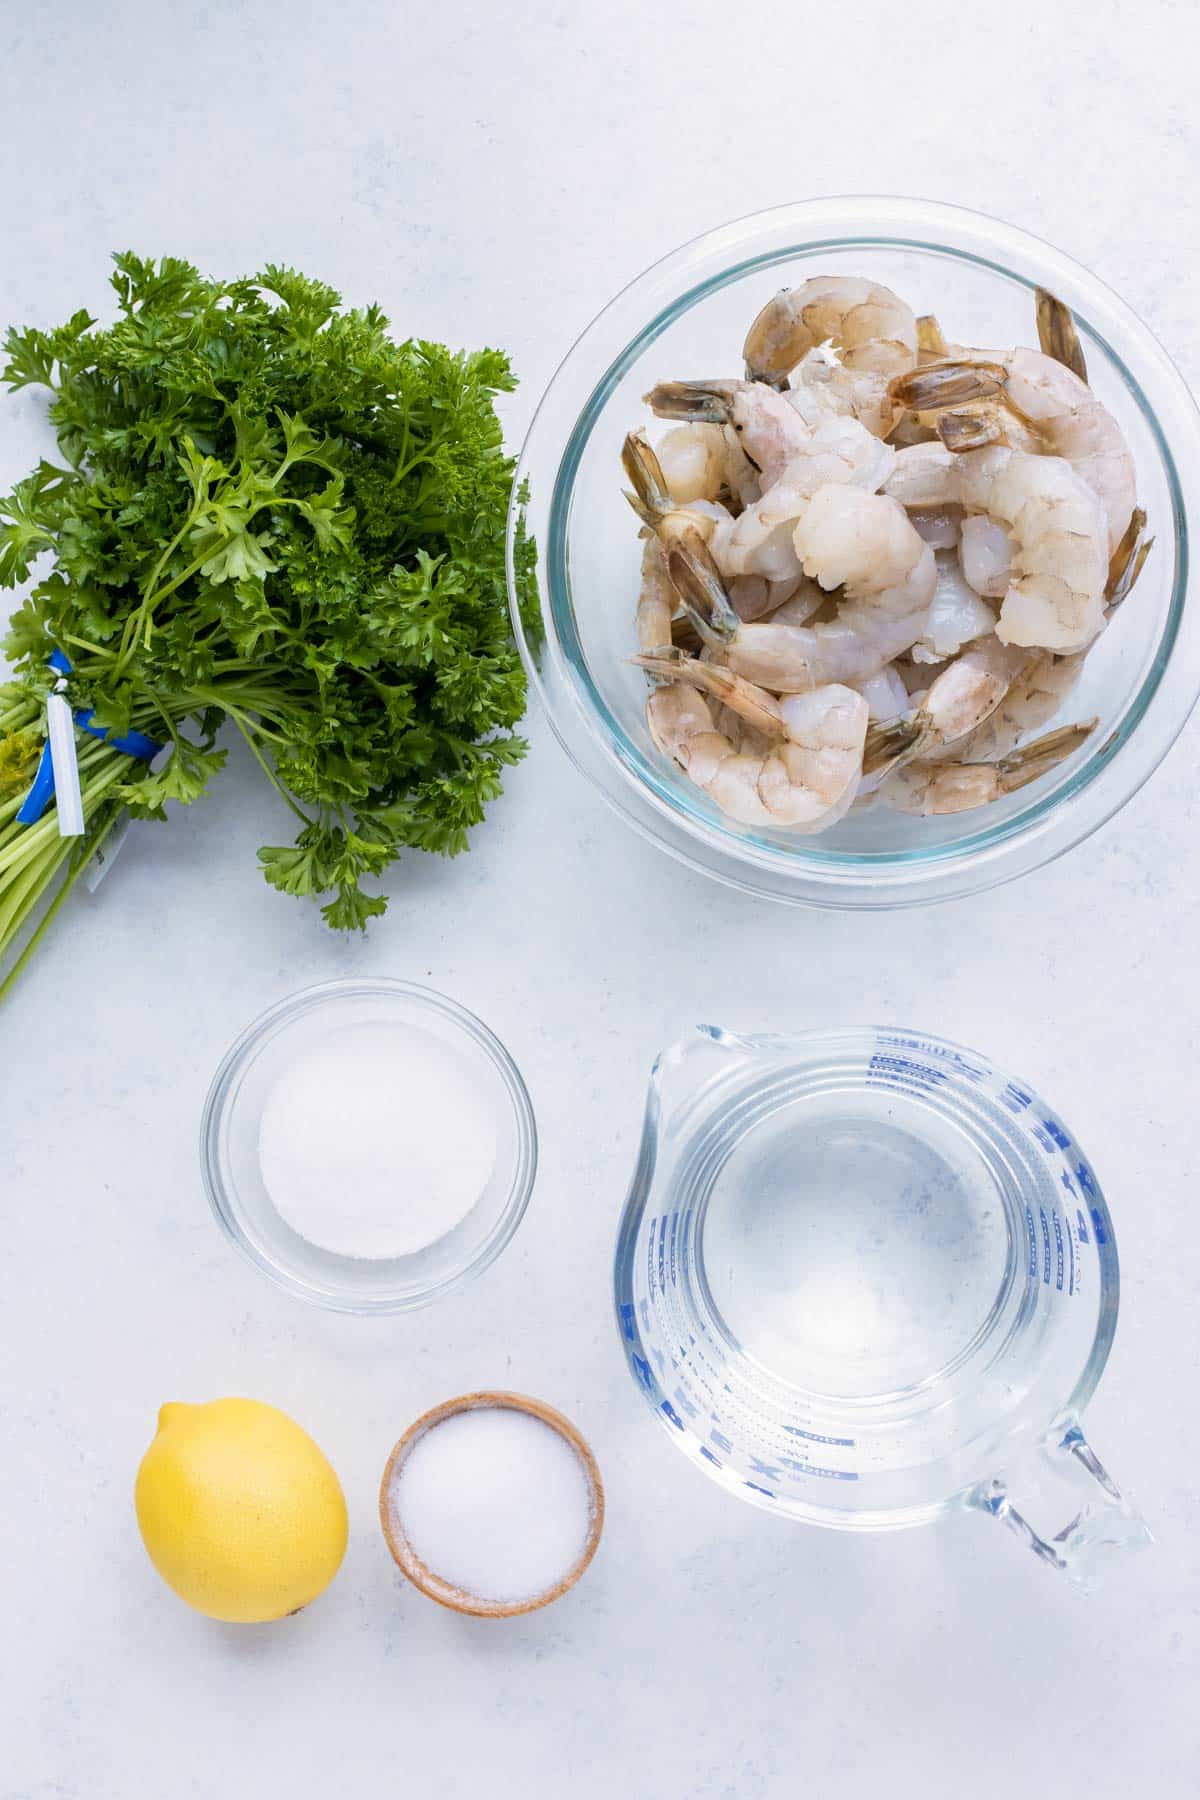 Shrimp, water, parsley, lemons, sugar, water, and cocktail sauce are the ingredients needed for this recipe.